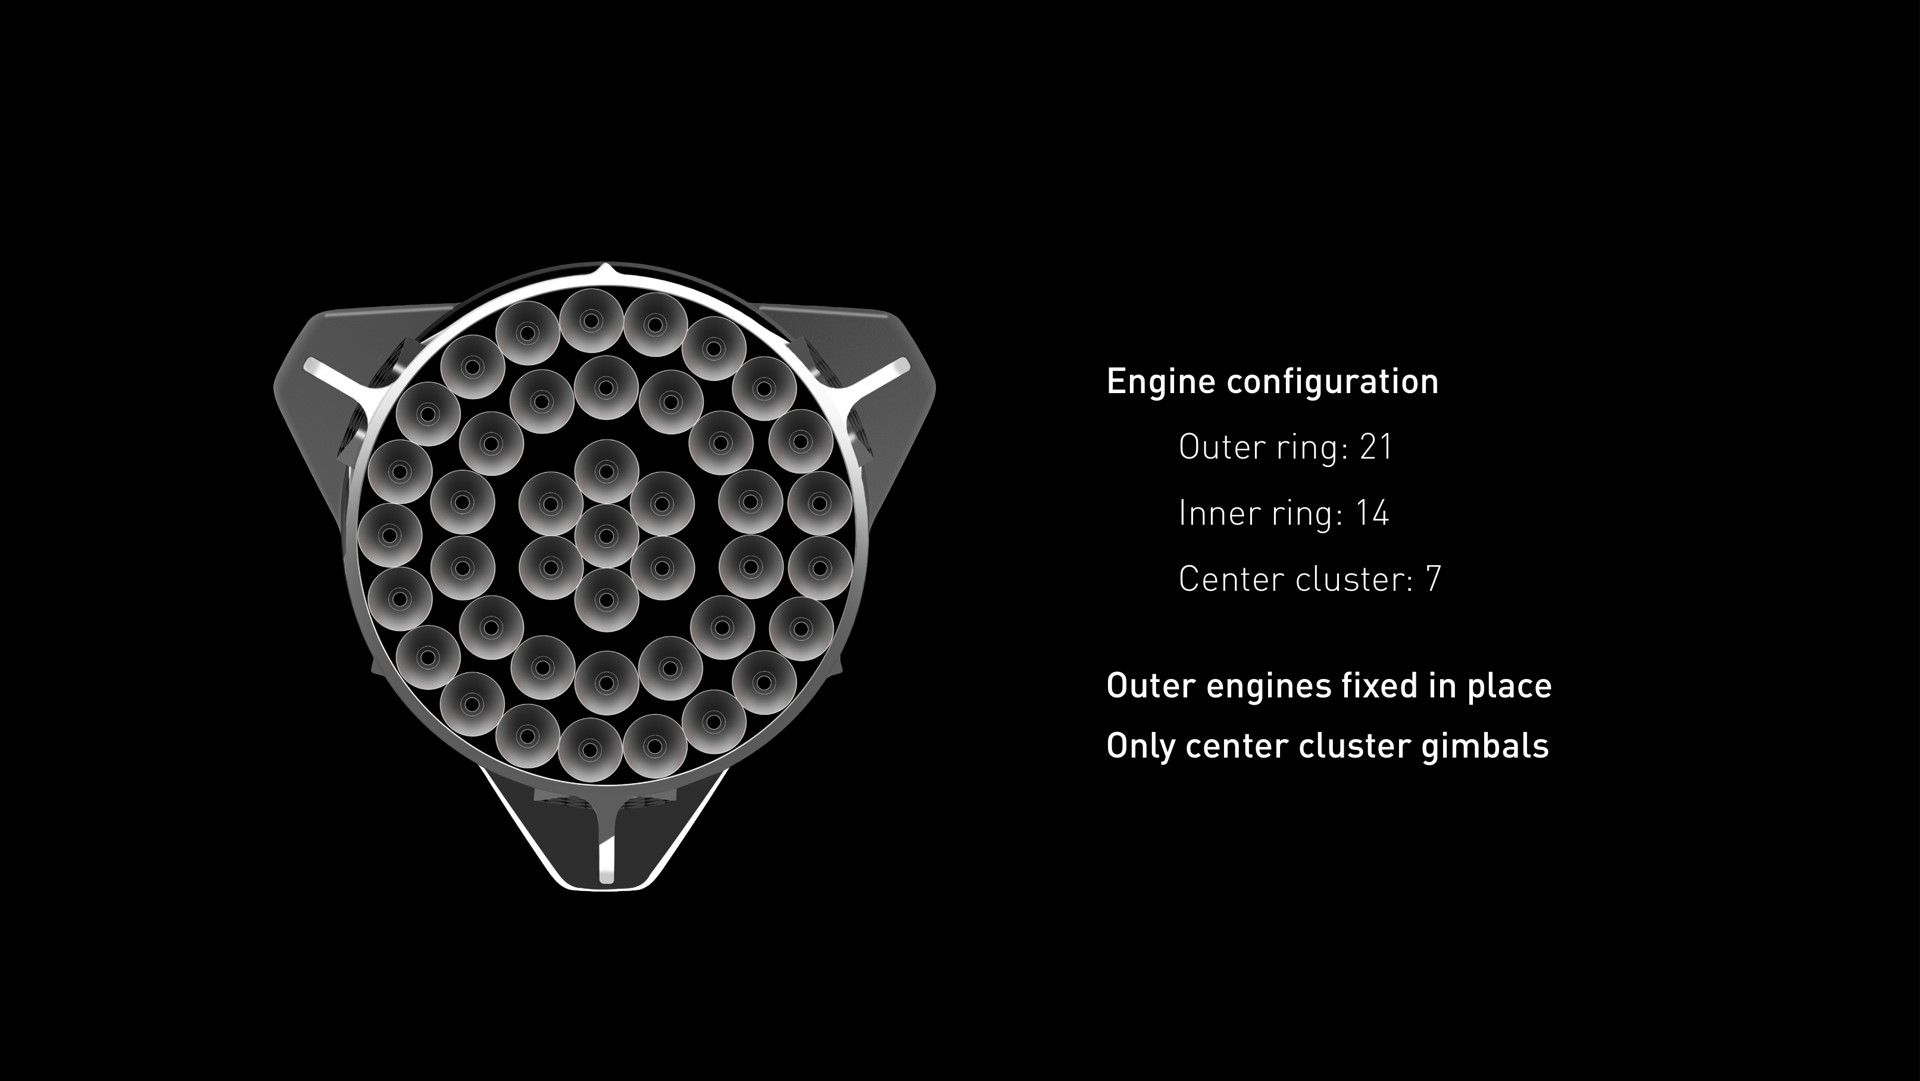 engine configuration outer ring inner ring outer engines fixed in place only center cluster gimbals | SpaceX